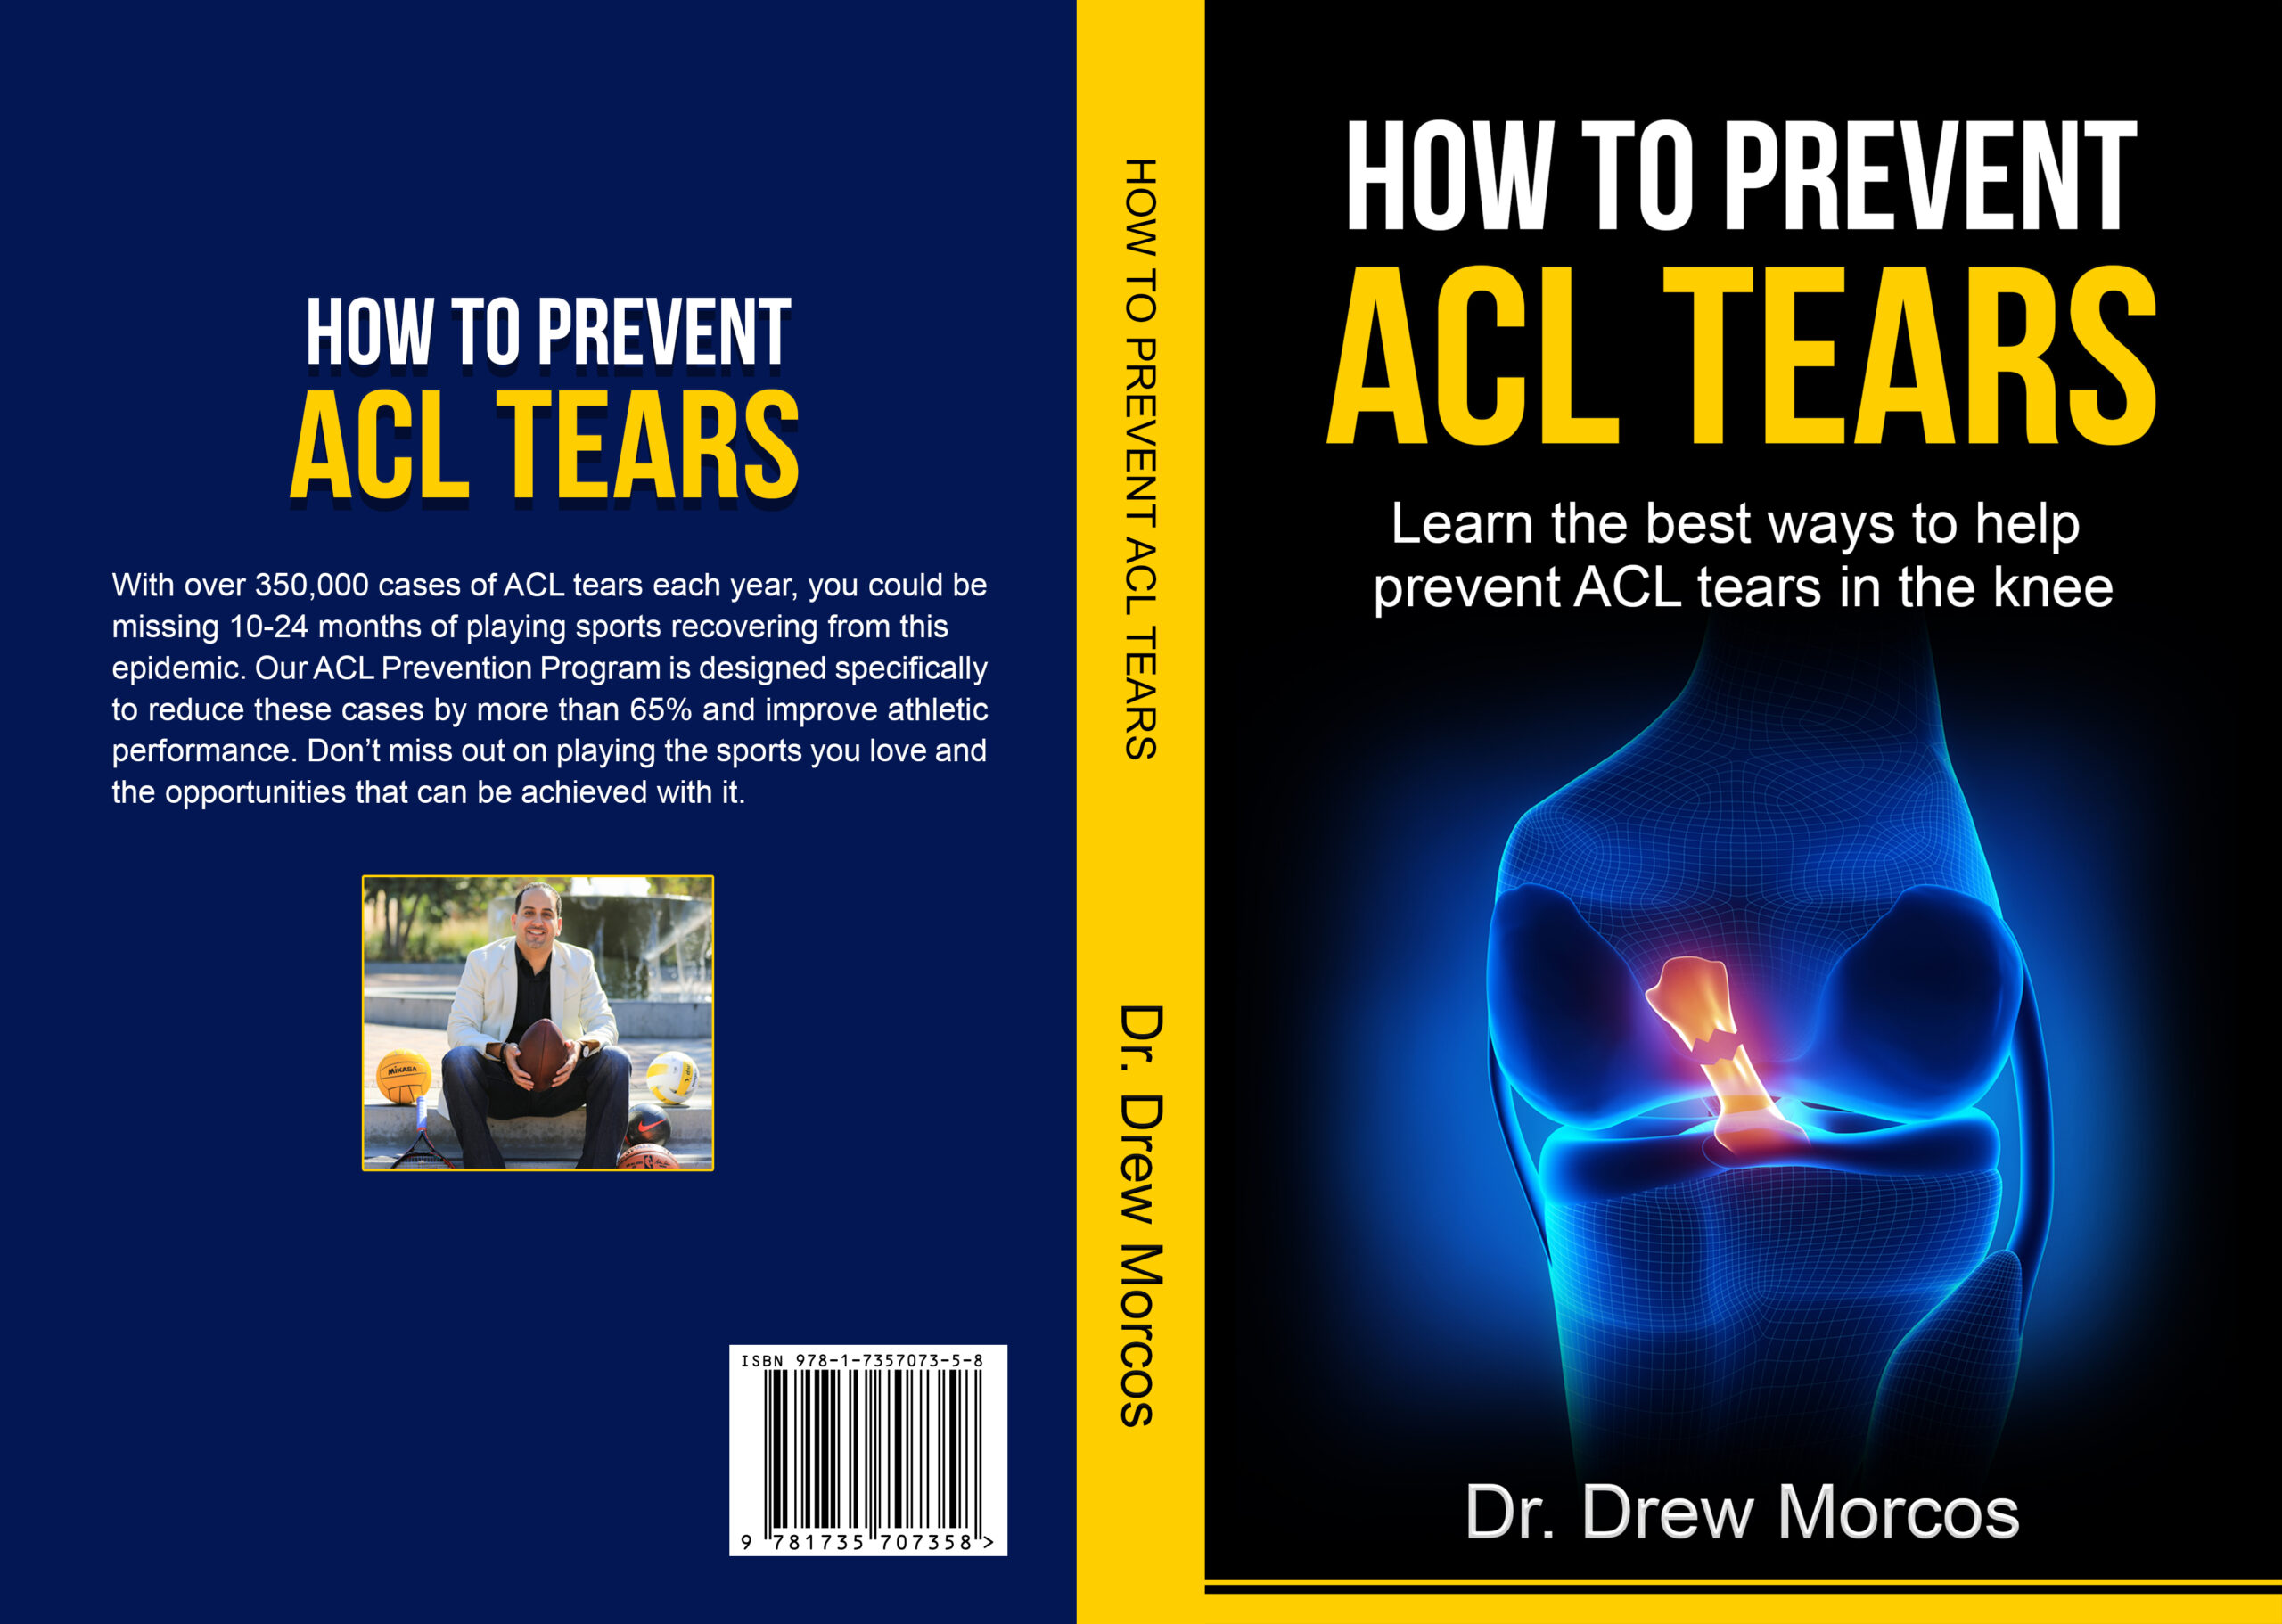 How To Prevent ACL Tears - Download the e-book now